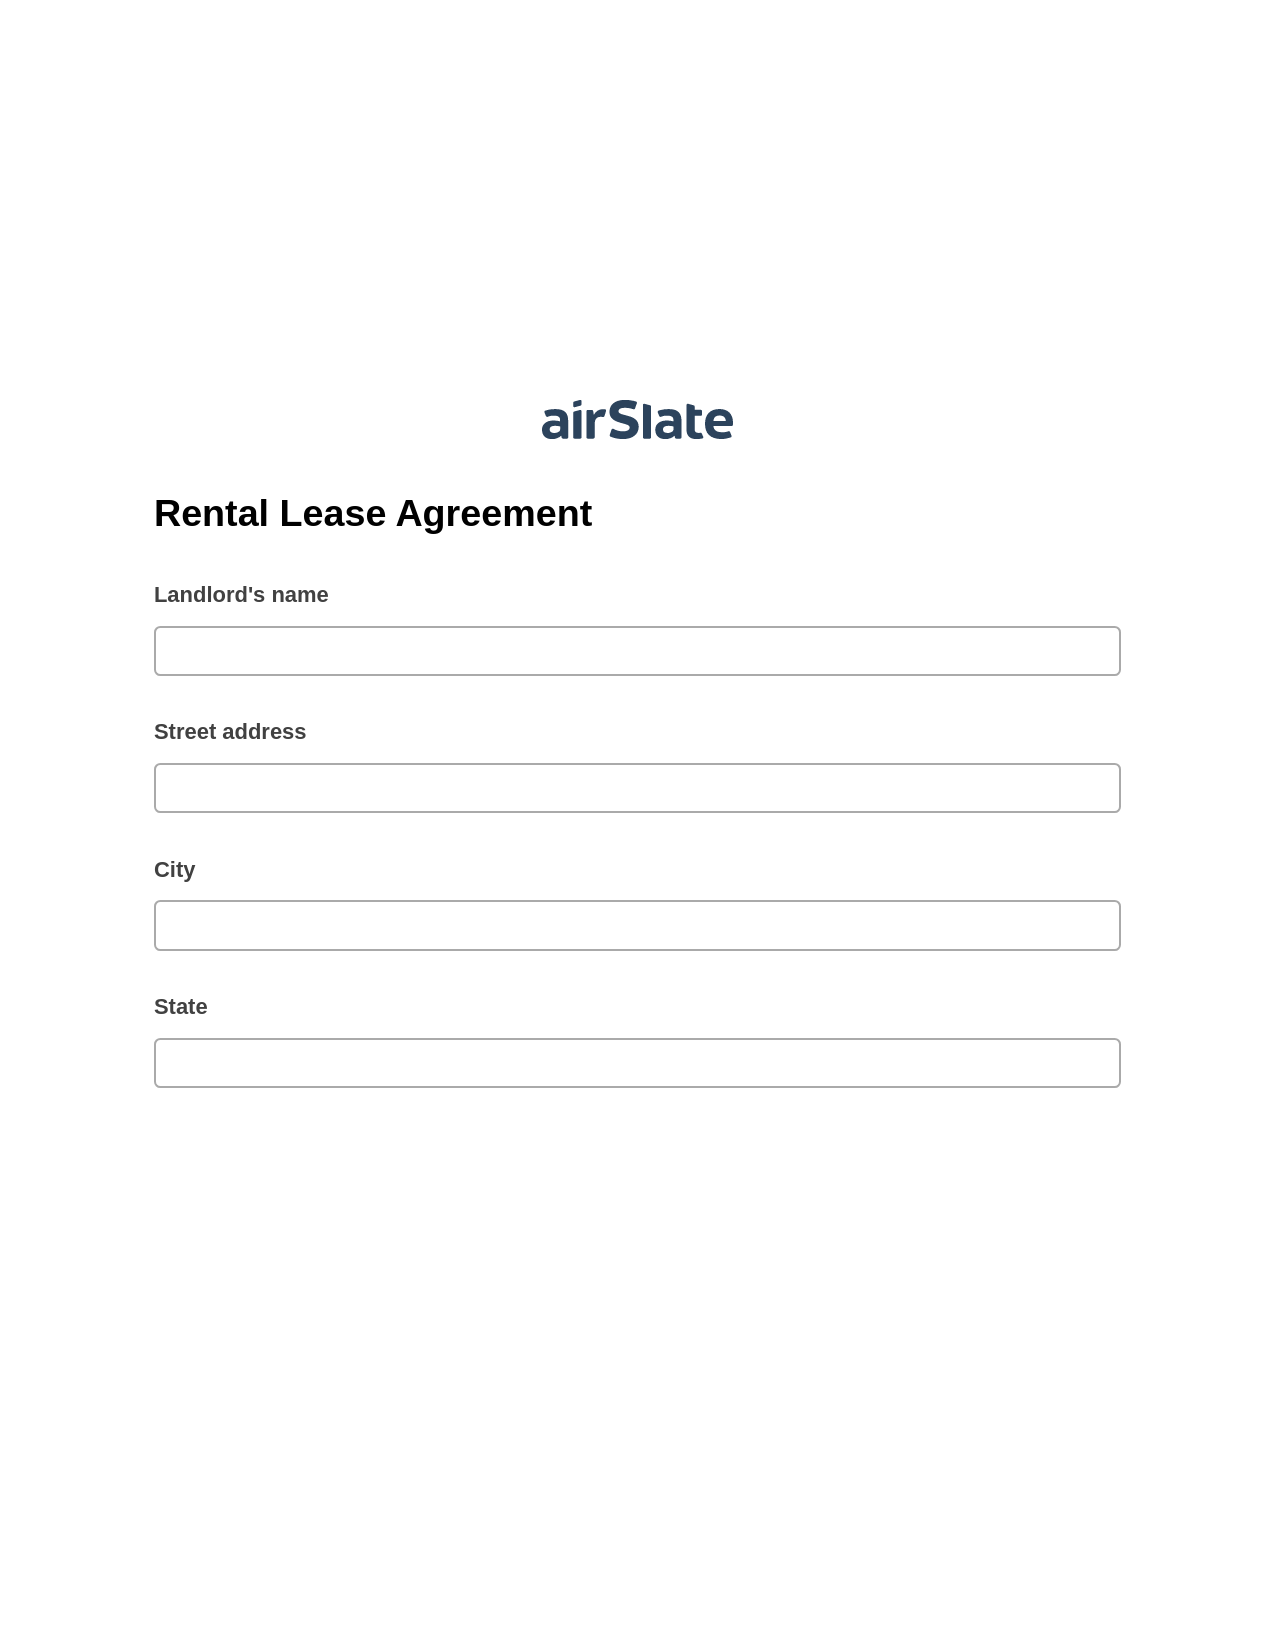 Rental Lease Agreement Pre-fill from CSV File Dropdown Options Bot, Create Slate Reminder Bot, Export to Google Sheet Bot